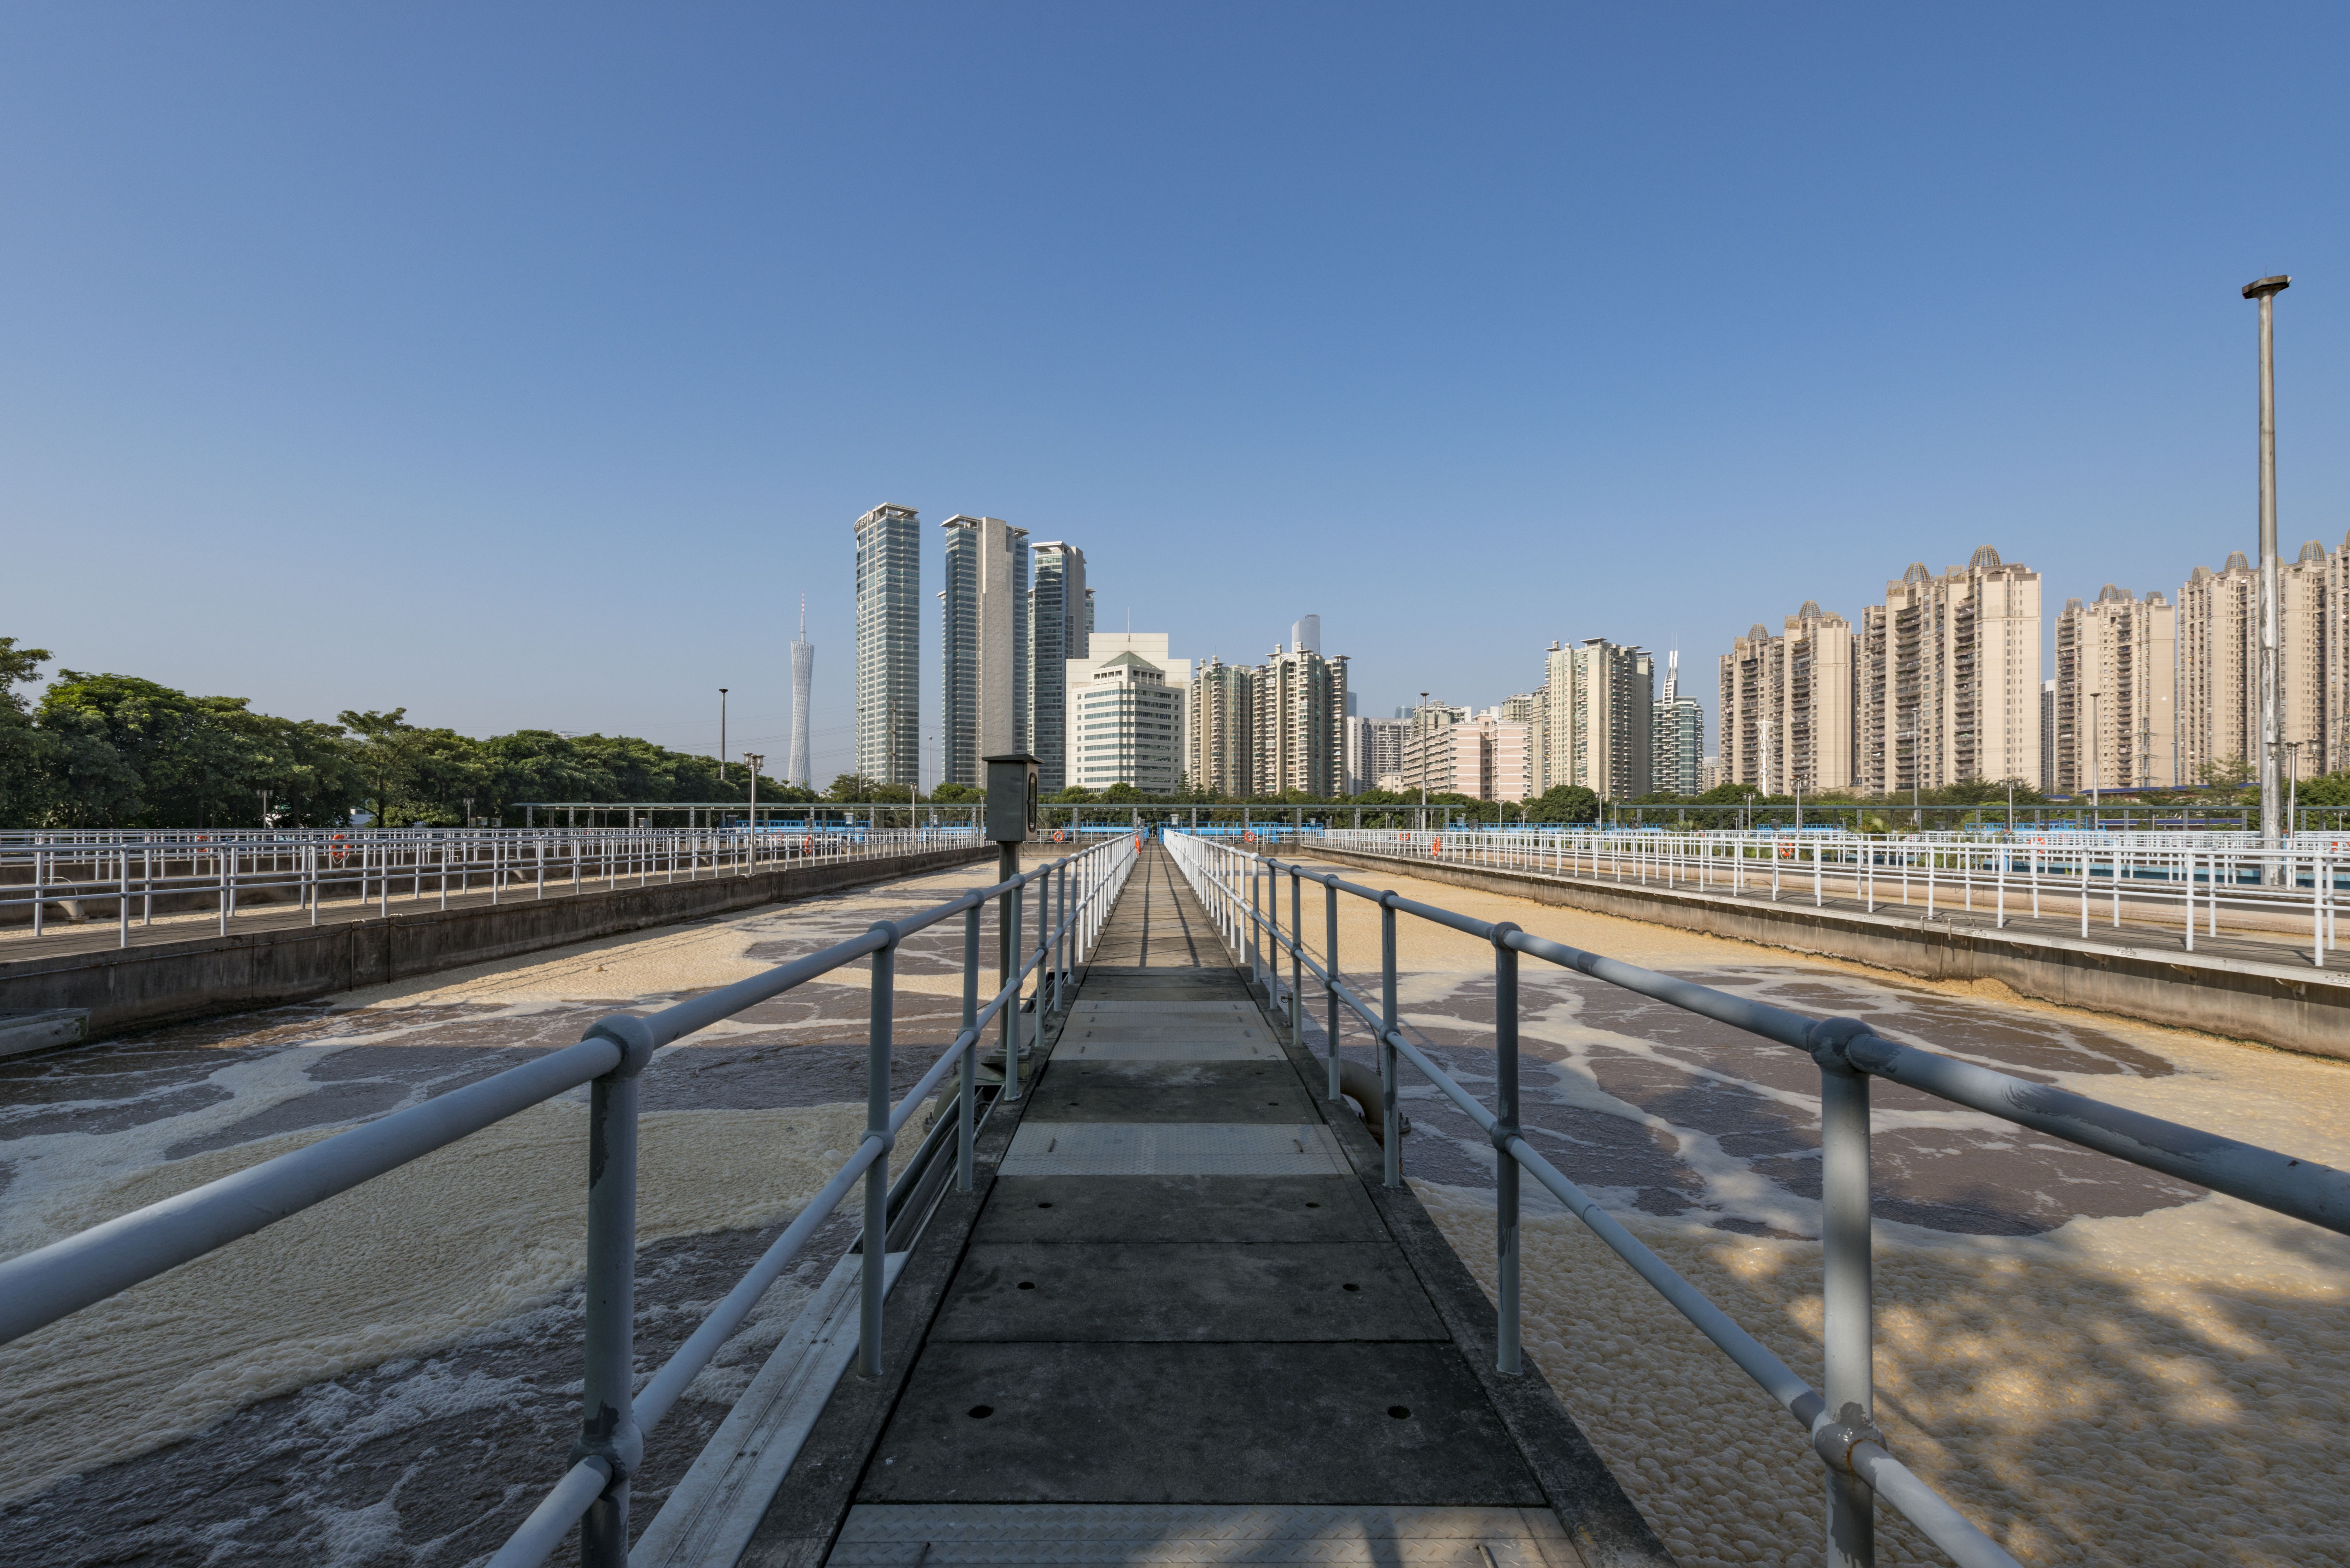 Guangzhou Liede Wastewater Treatment Plant (Phase I) Project